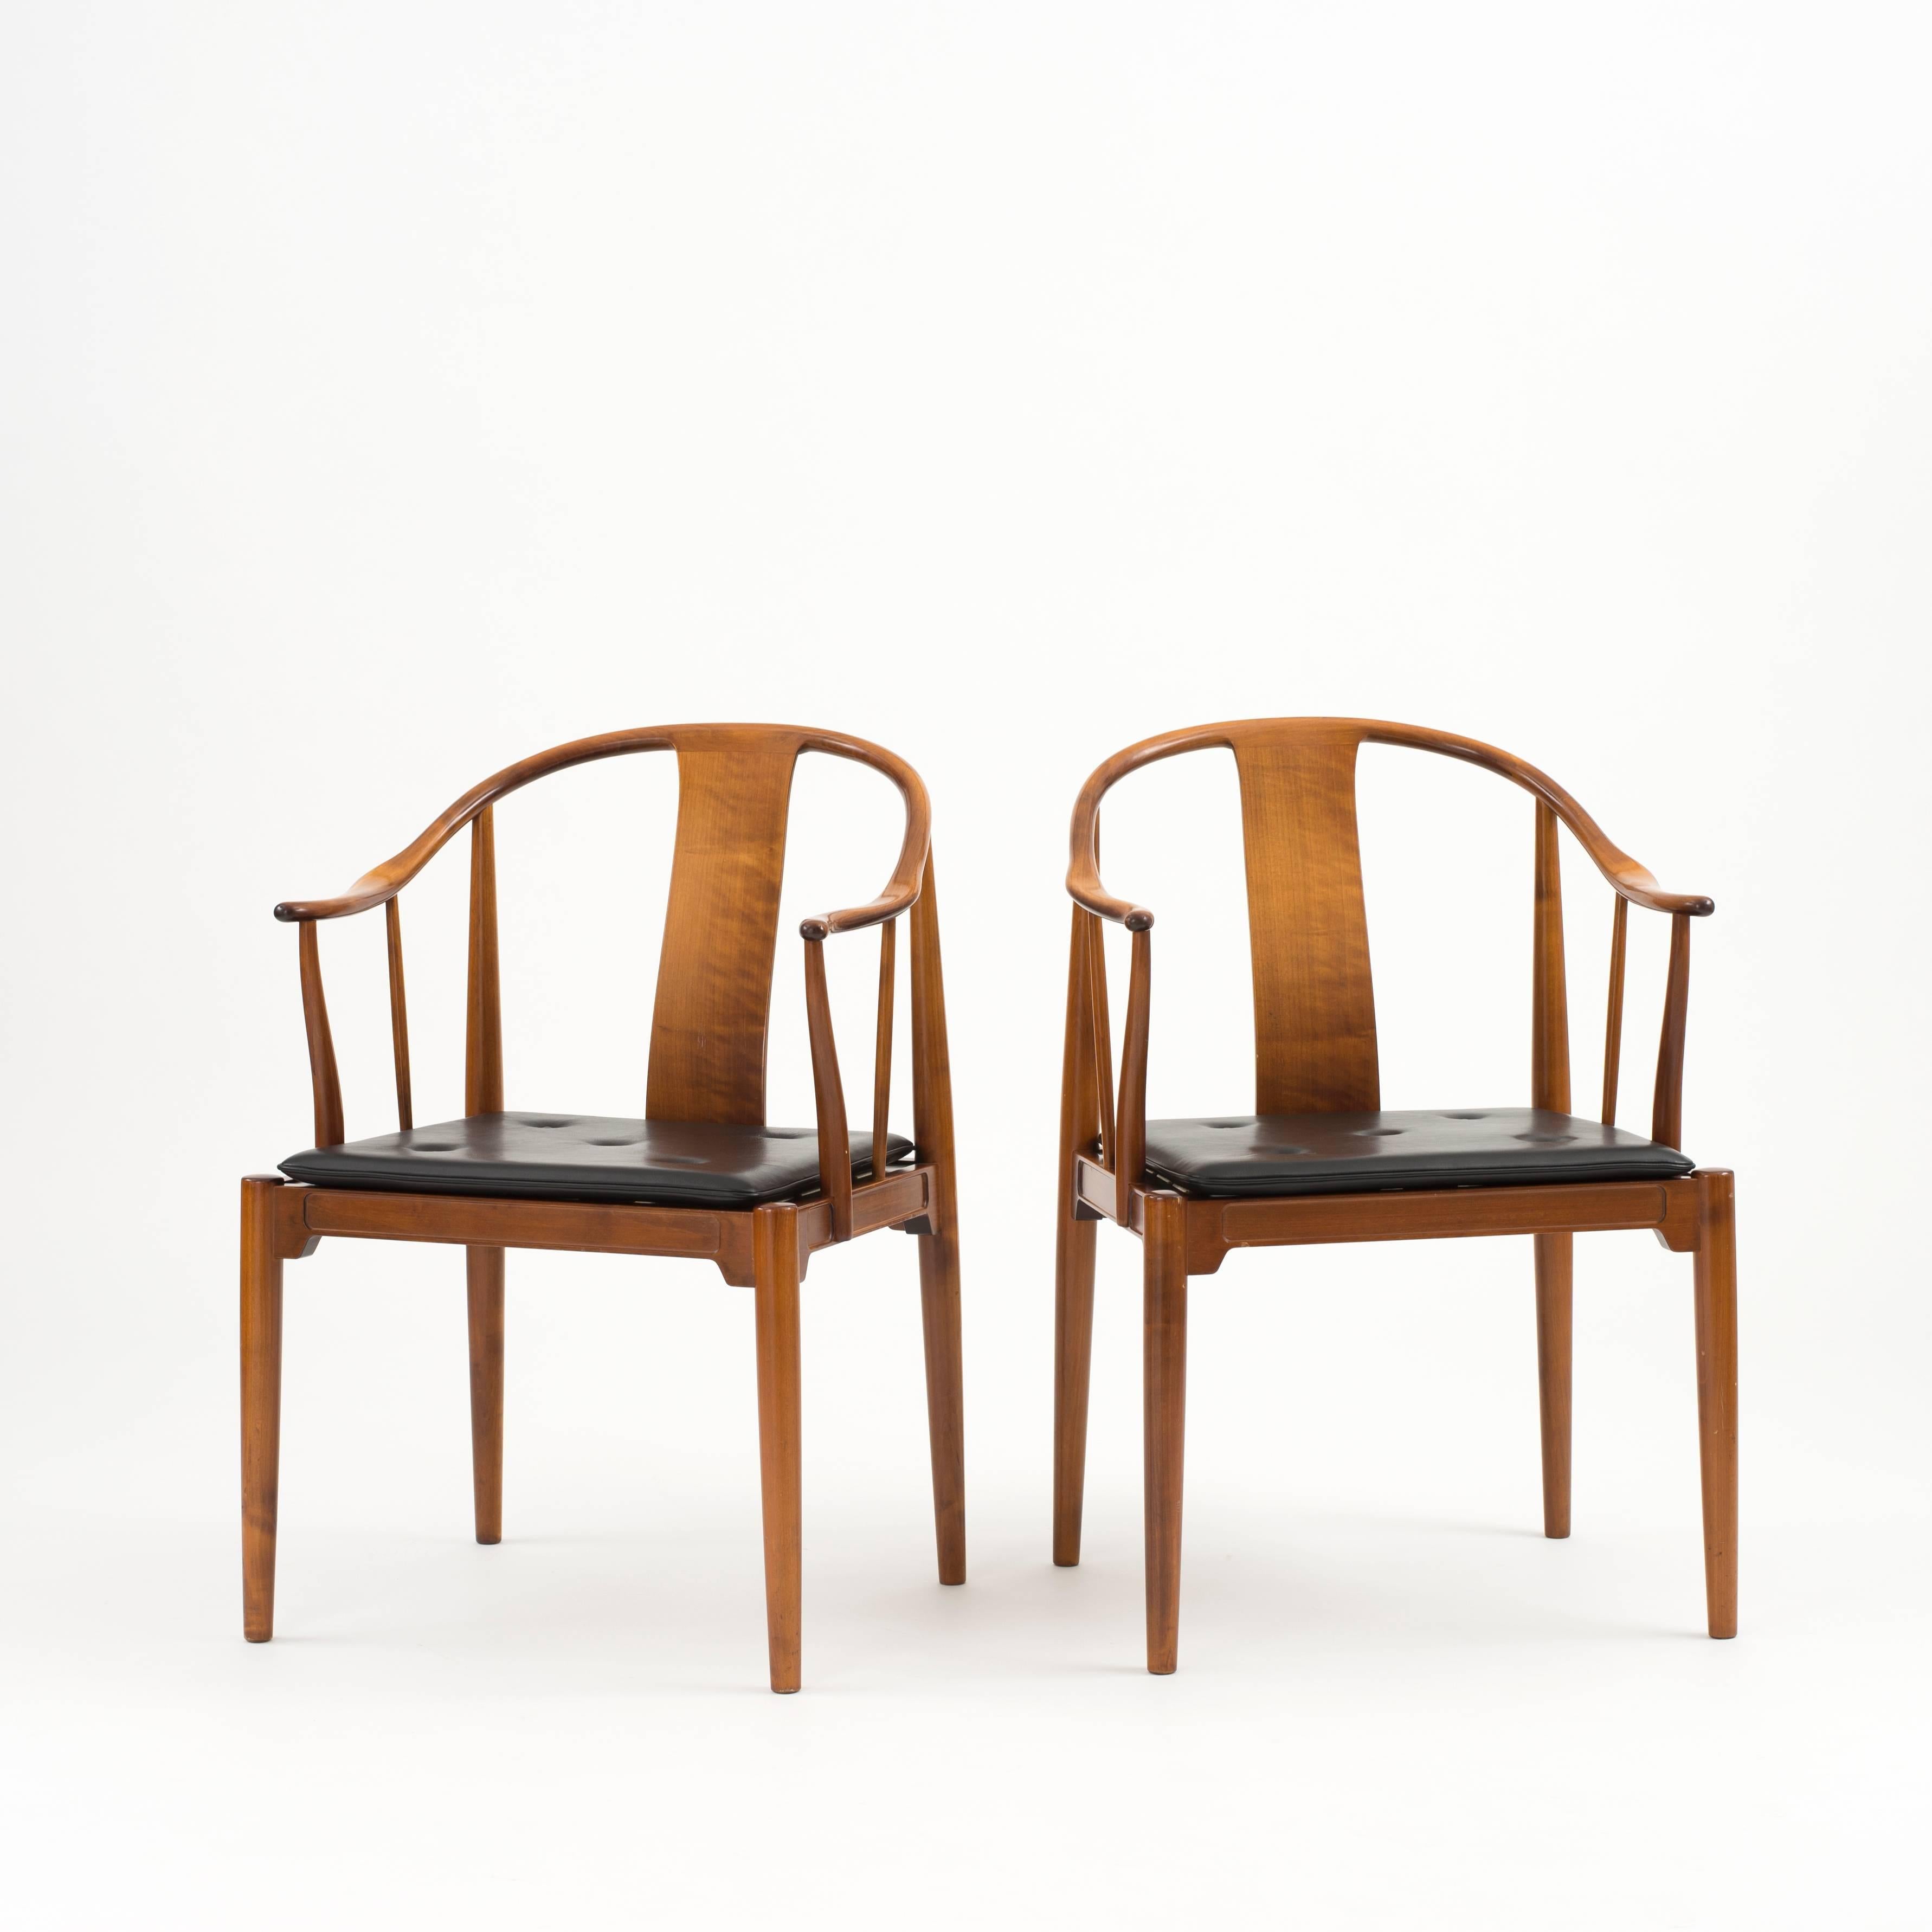 A pair of Hans J. Wegner 'China Chair', 1944. Executed by Fritz Hansen, Denmark, 1972. 

Stained cherrywood and leather cushions. 

 